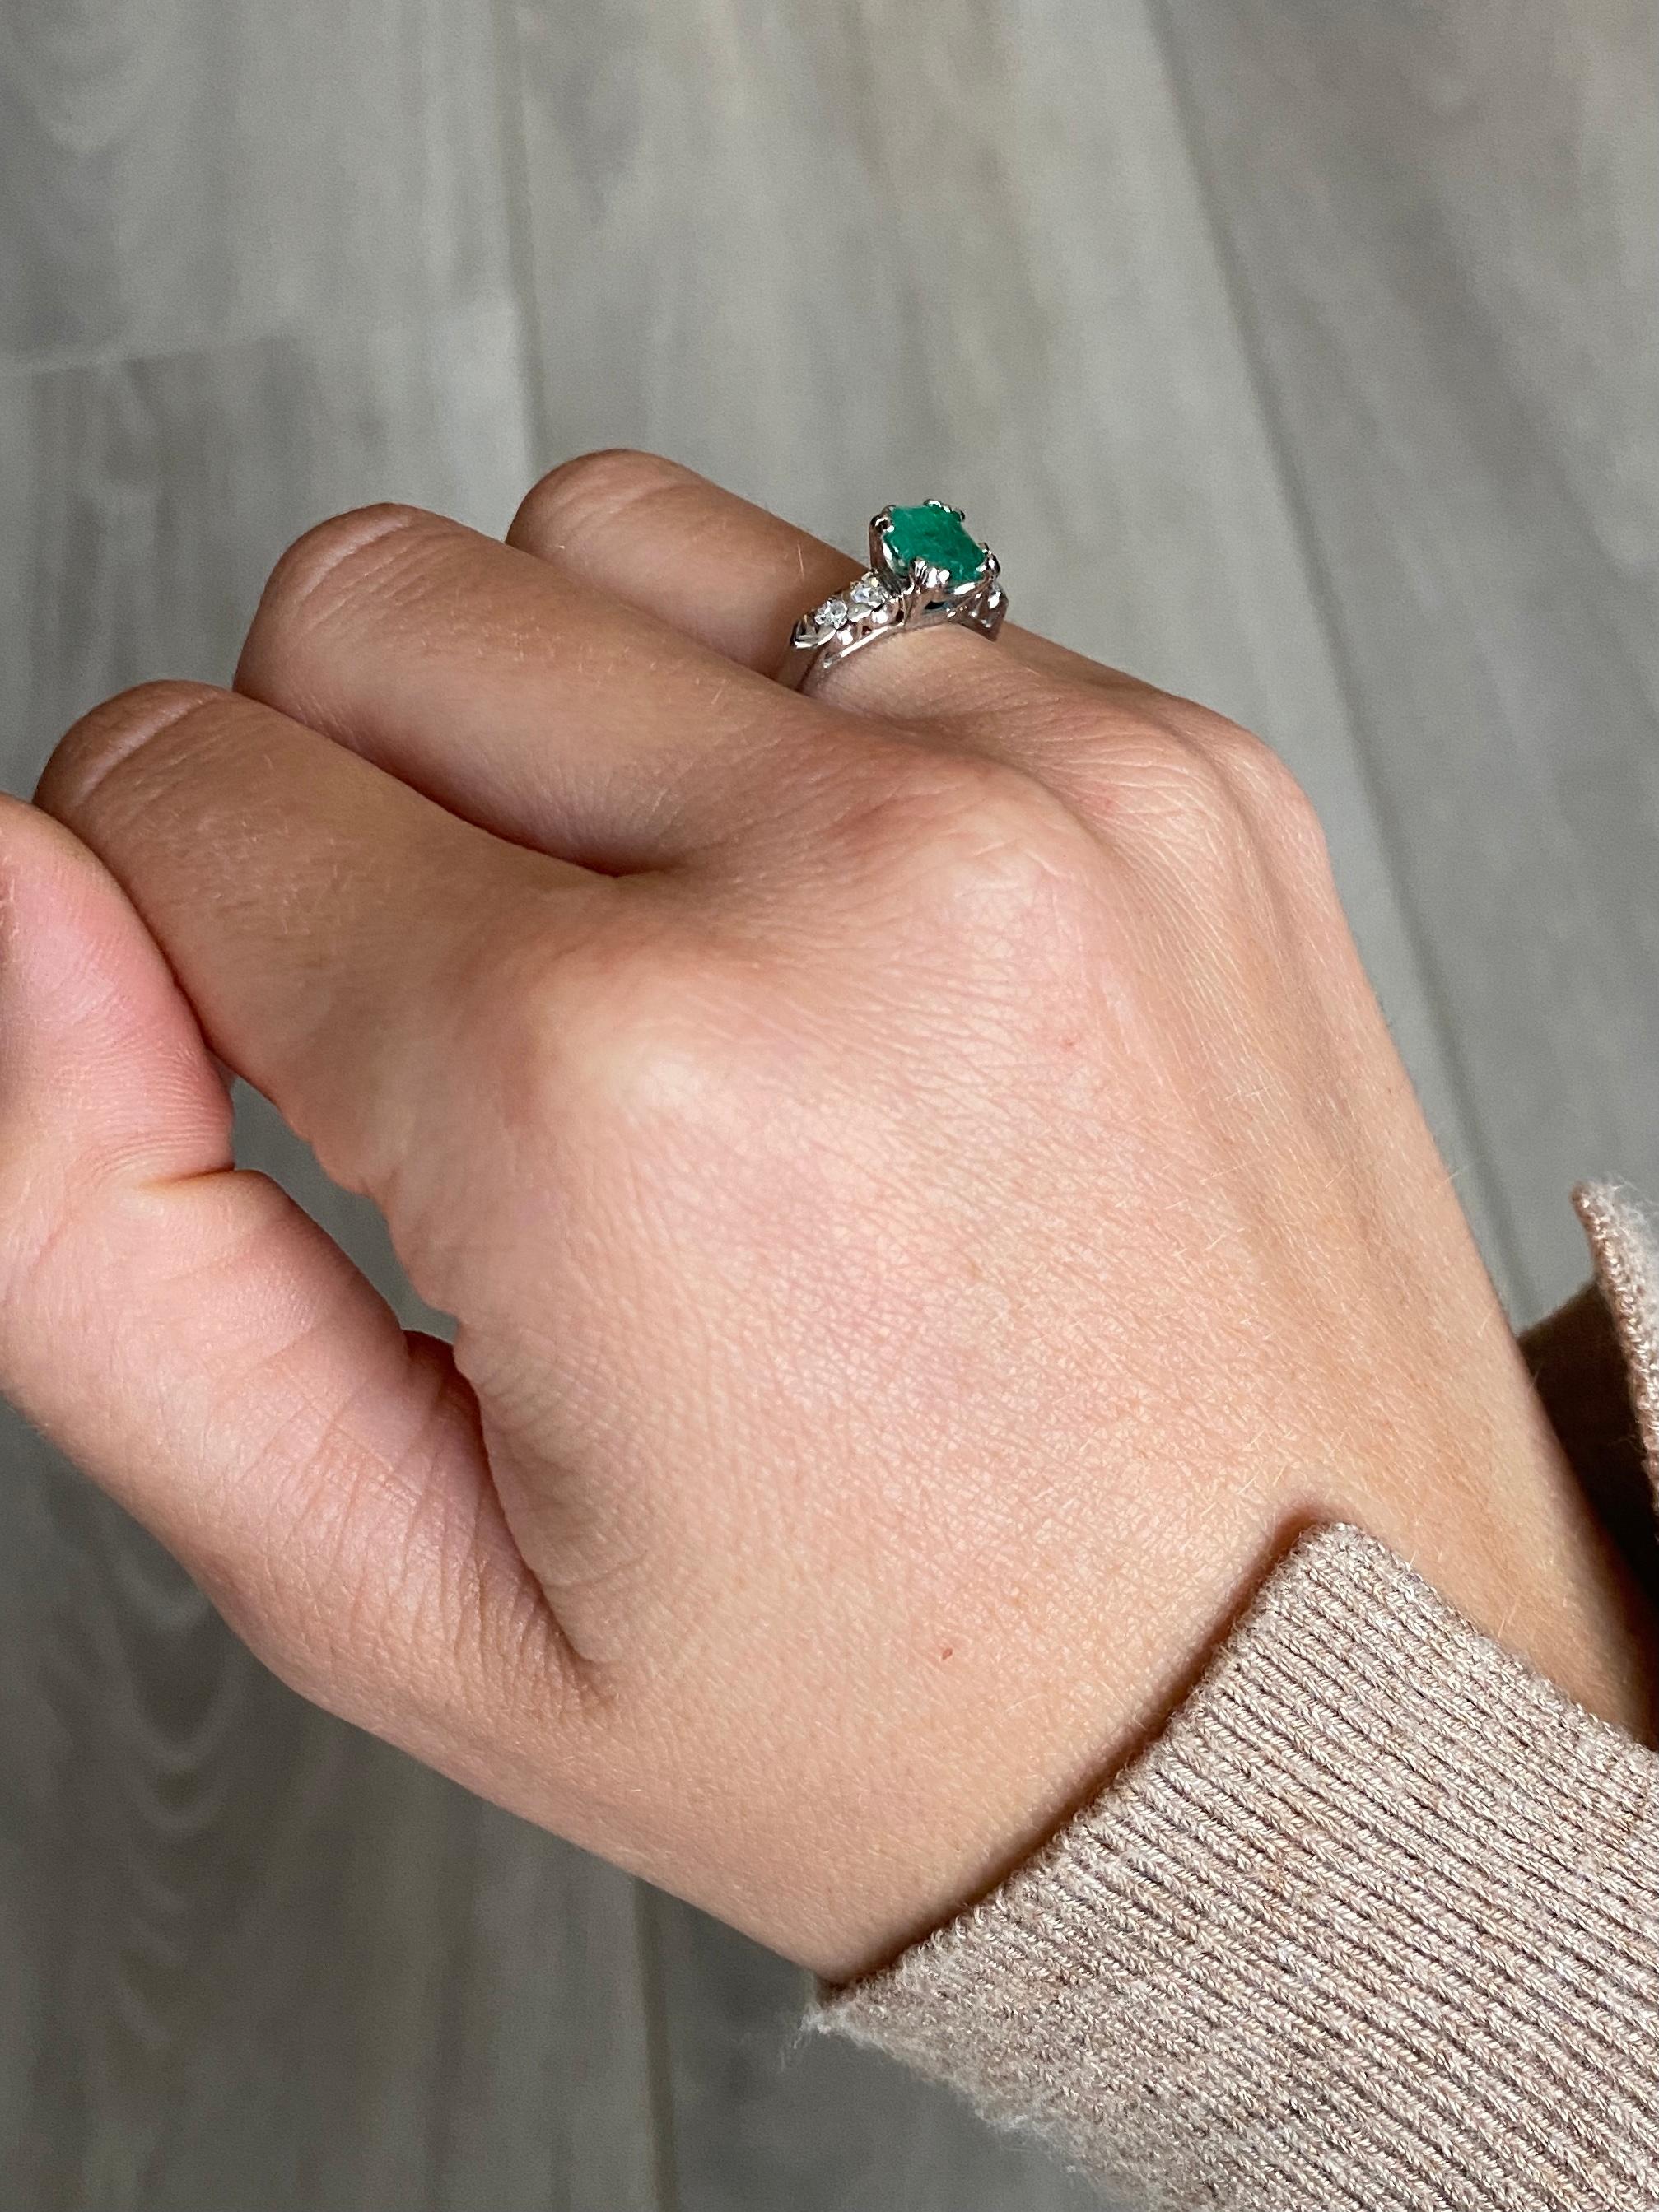 The Emerald in this ring measures 1ct and is a great colour. Either side sit a pair of diamonds totalling 10pts per shoulder. The ring is modelled out of 14carat white gold.  

Ring Size: L or 5 3/4
Height Off Finger: 6mm

Weight: 2.3g